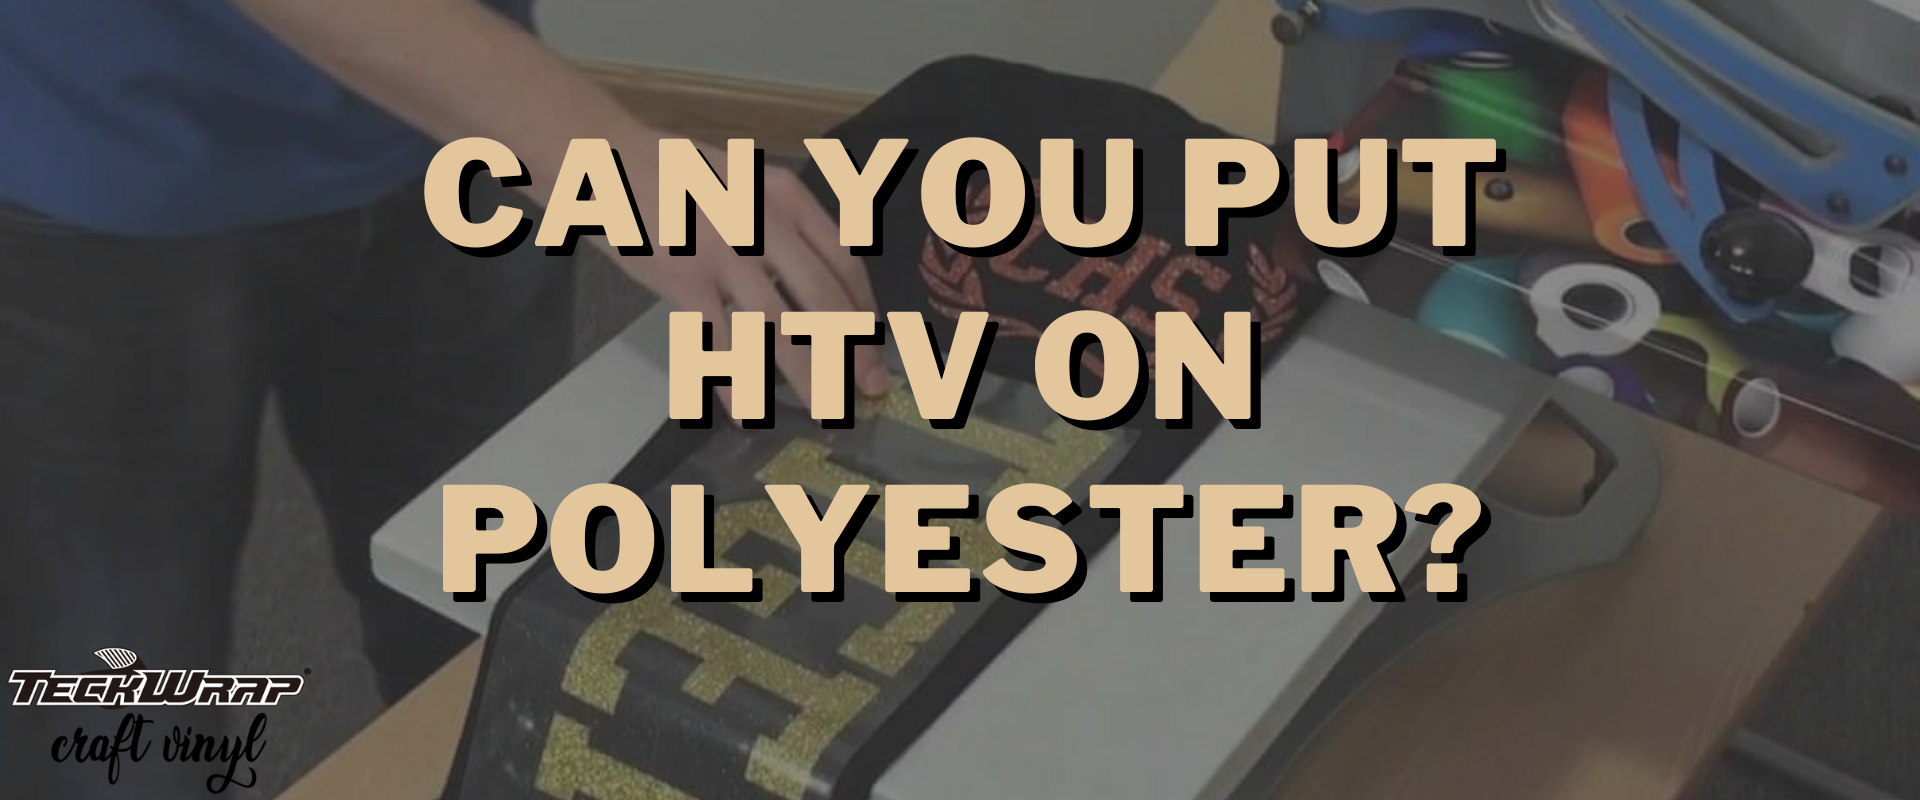 Can You Put HTV On Polyester? 10 Tips For Printing HTV On